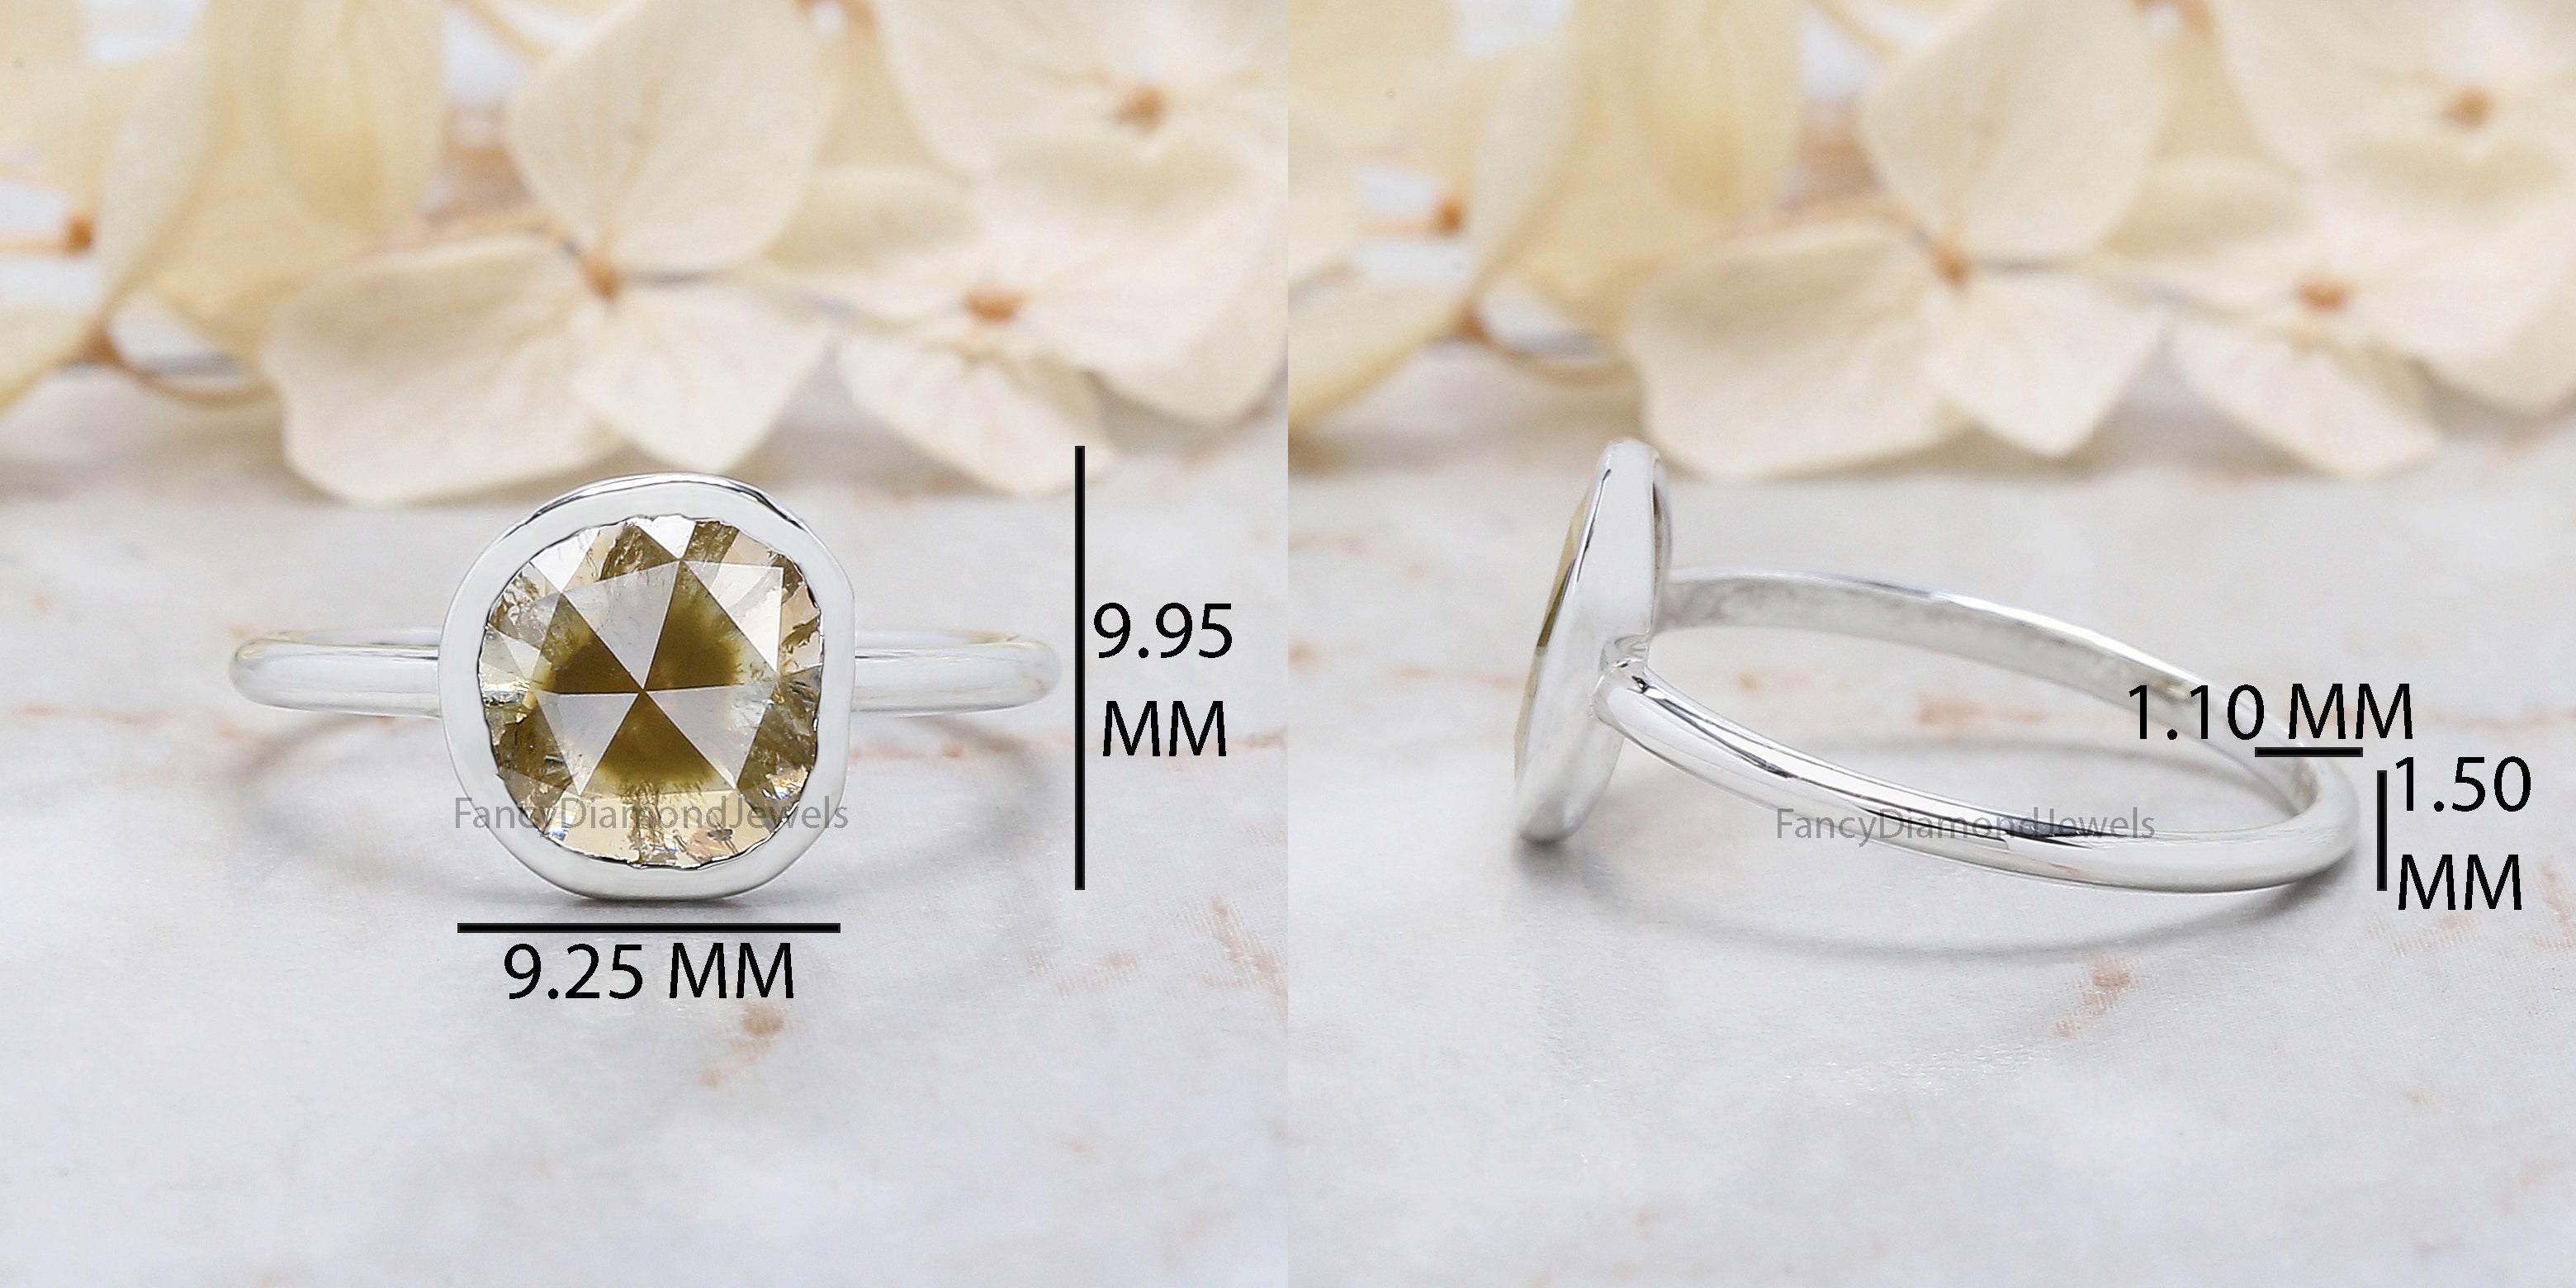 Slice Yellow Color Diamond Ring 1.14 Ct 8.30 MM Slice Shape Diamond Ring 14K Solid White Gold Silver Engagement Ring Gift For Her QL3025